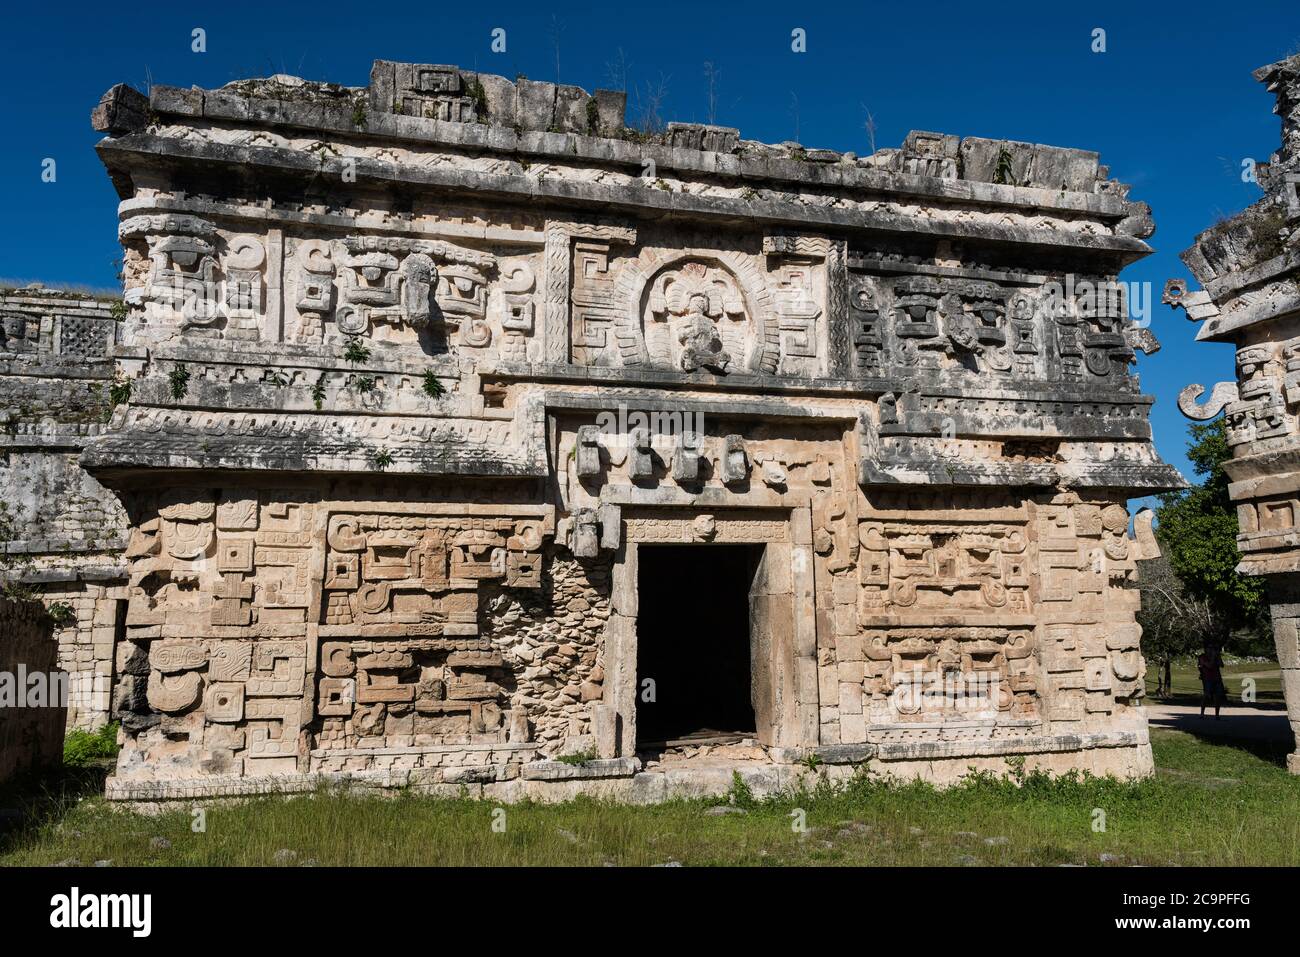 The ornately-carved Chenes-style facade of the entrance to the Nunnery Complex in the ruins of the great Mayan city of Chichen Itza, Yucatan, Mexico. Stock Photo